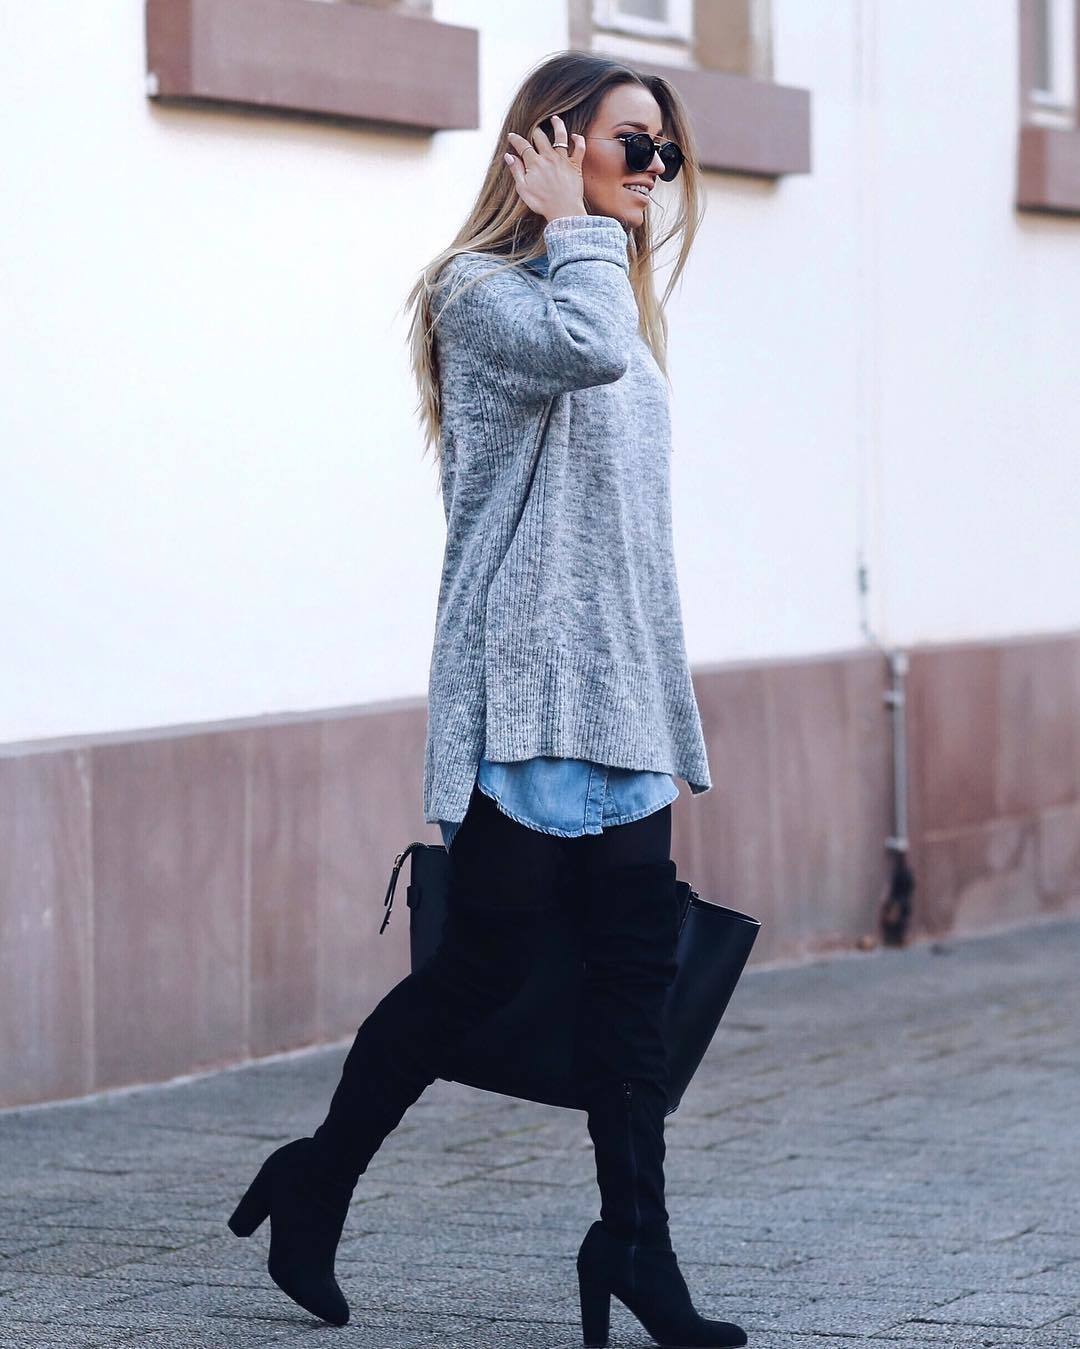 Gigi Hadid looks radiant in a denim shirt and black leggings as she steps  out in